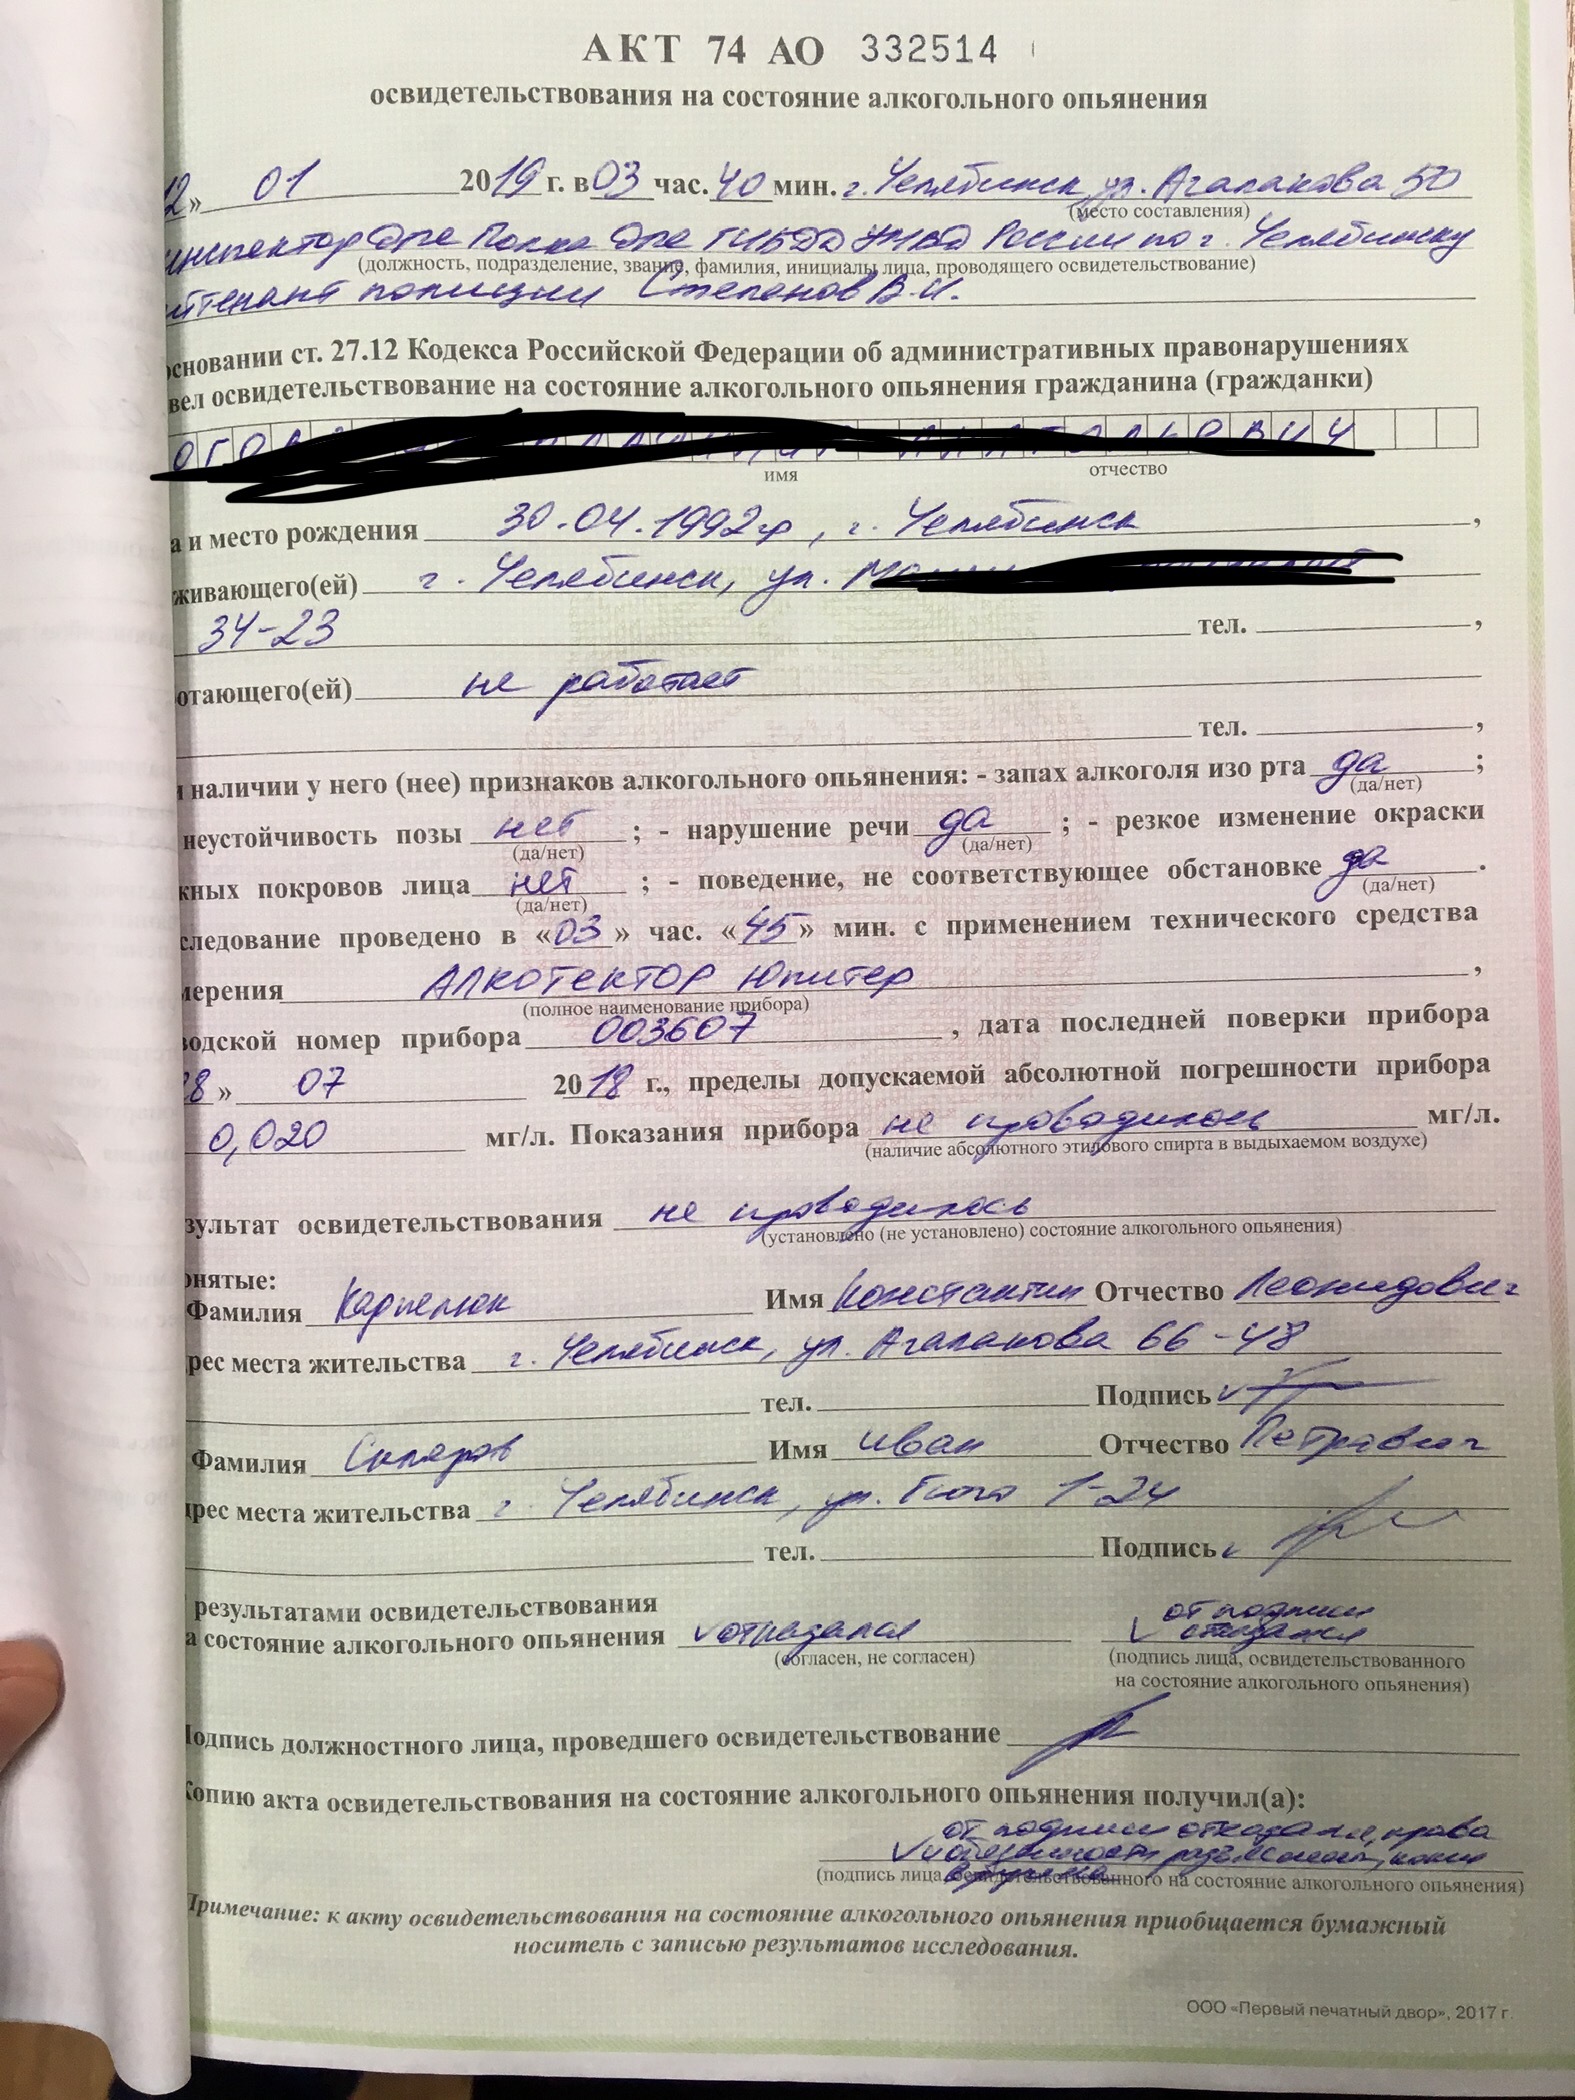 Such situation(2)... - Longpost, League of Lawyers, DPS, Chelyabinsk, My